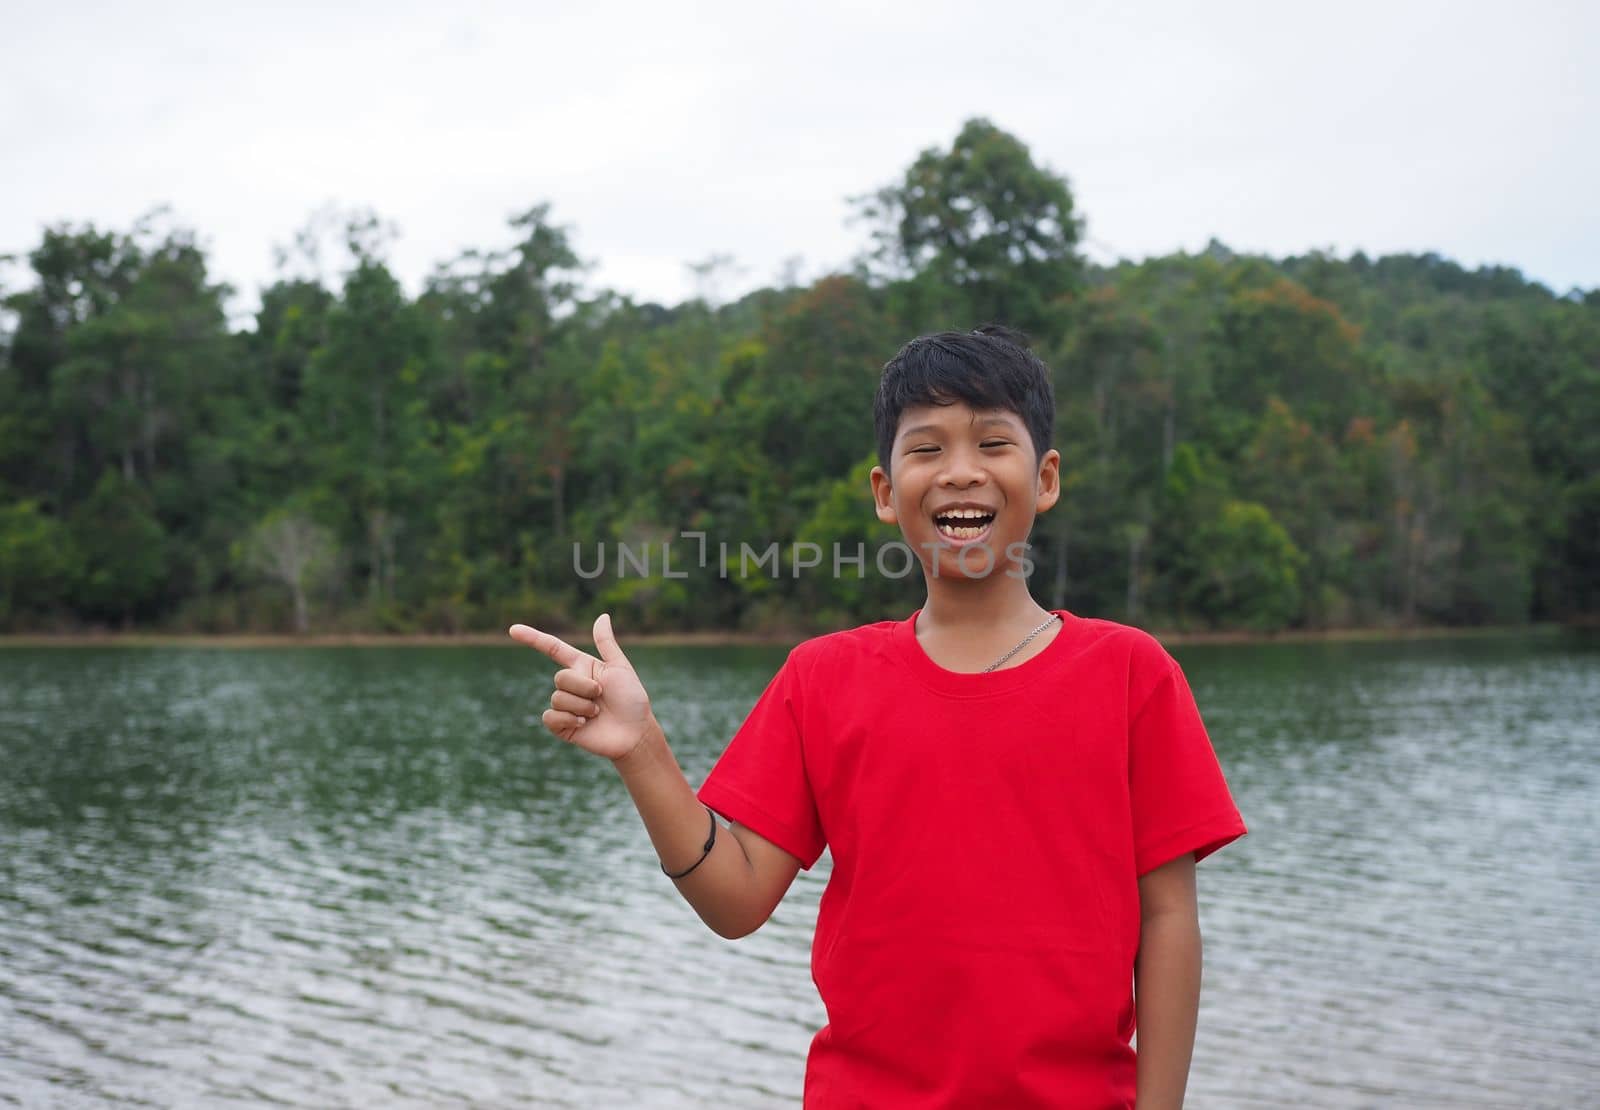 The boy smiled and pointed his hand to his side. On the background is a reservoir.